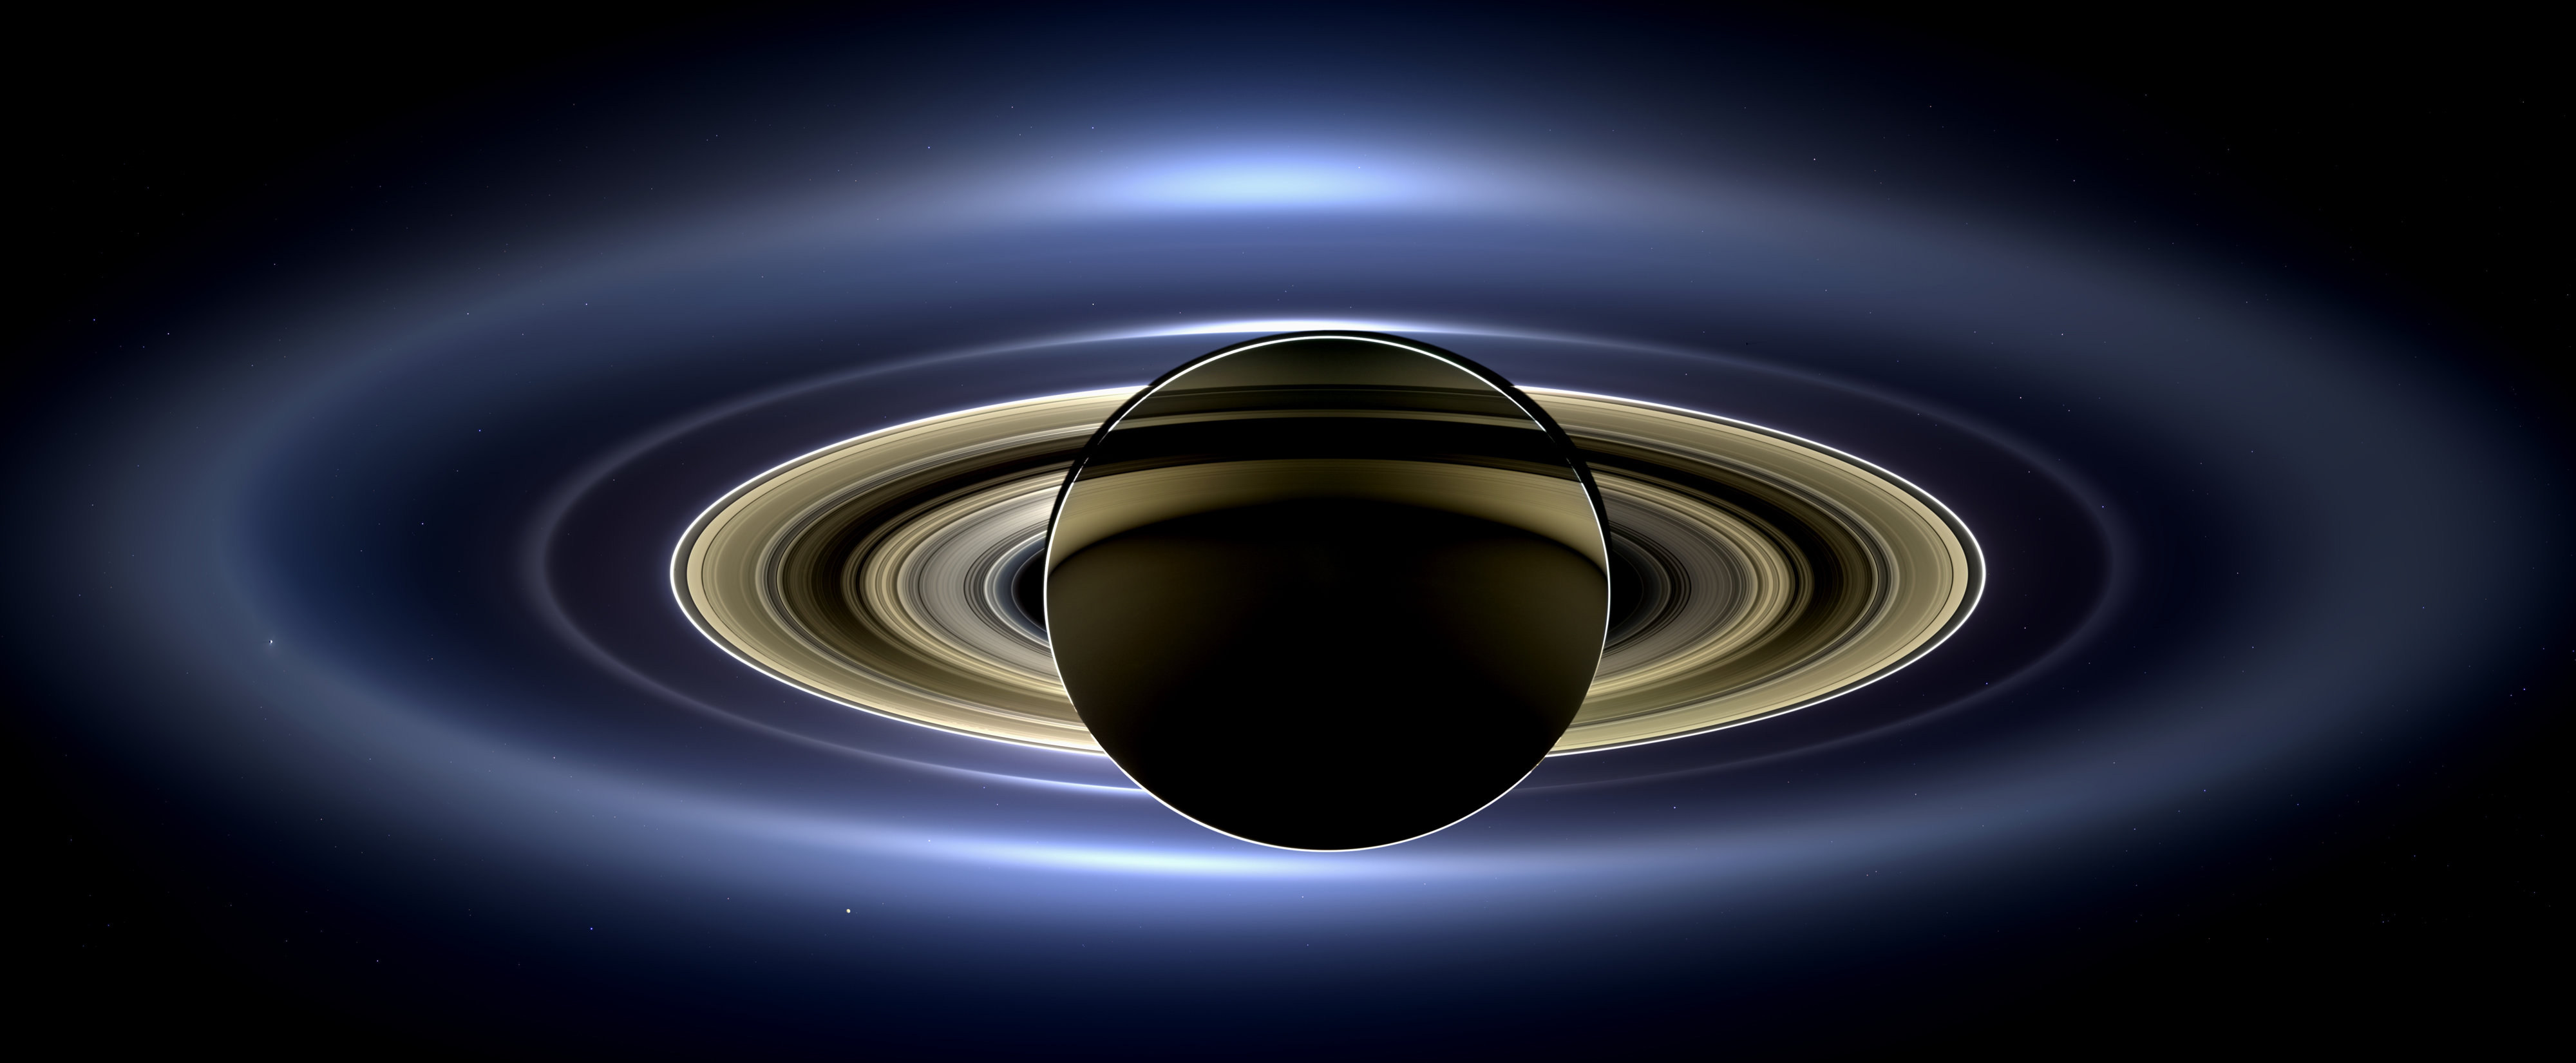 NASA’s Cassini spacecraft took this natural-color portrait on July 19, 2013, which is the first image to show Saturn, its moons and rings, plus Earth, Venus and Mars, all together. Image & caption credit: NASA/JPL-Caltech/SSI